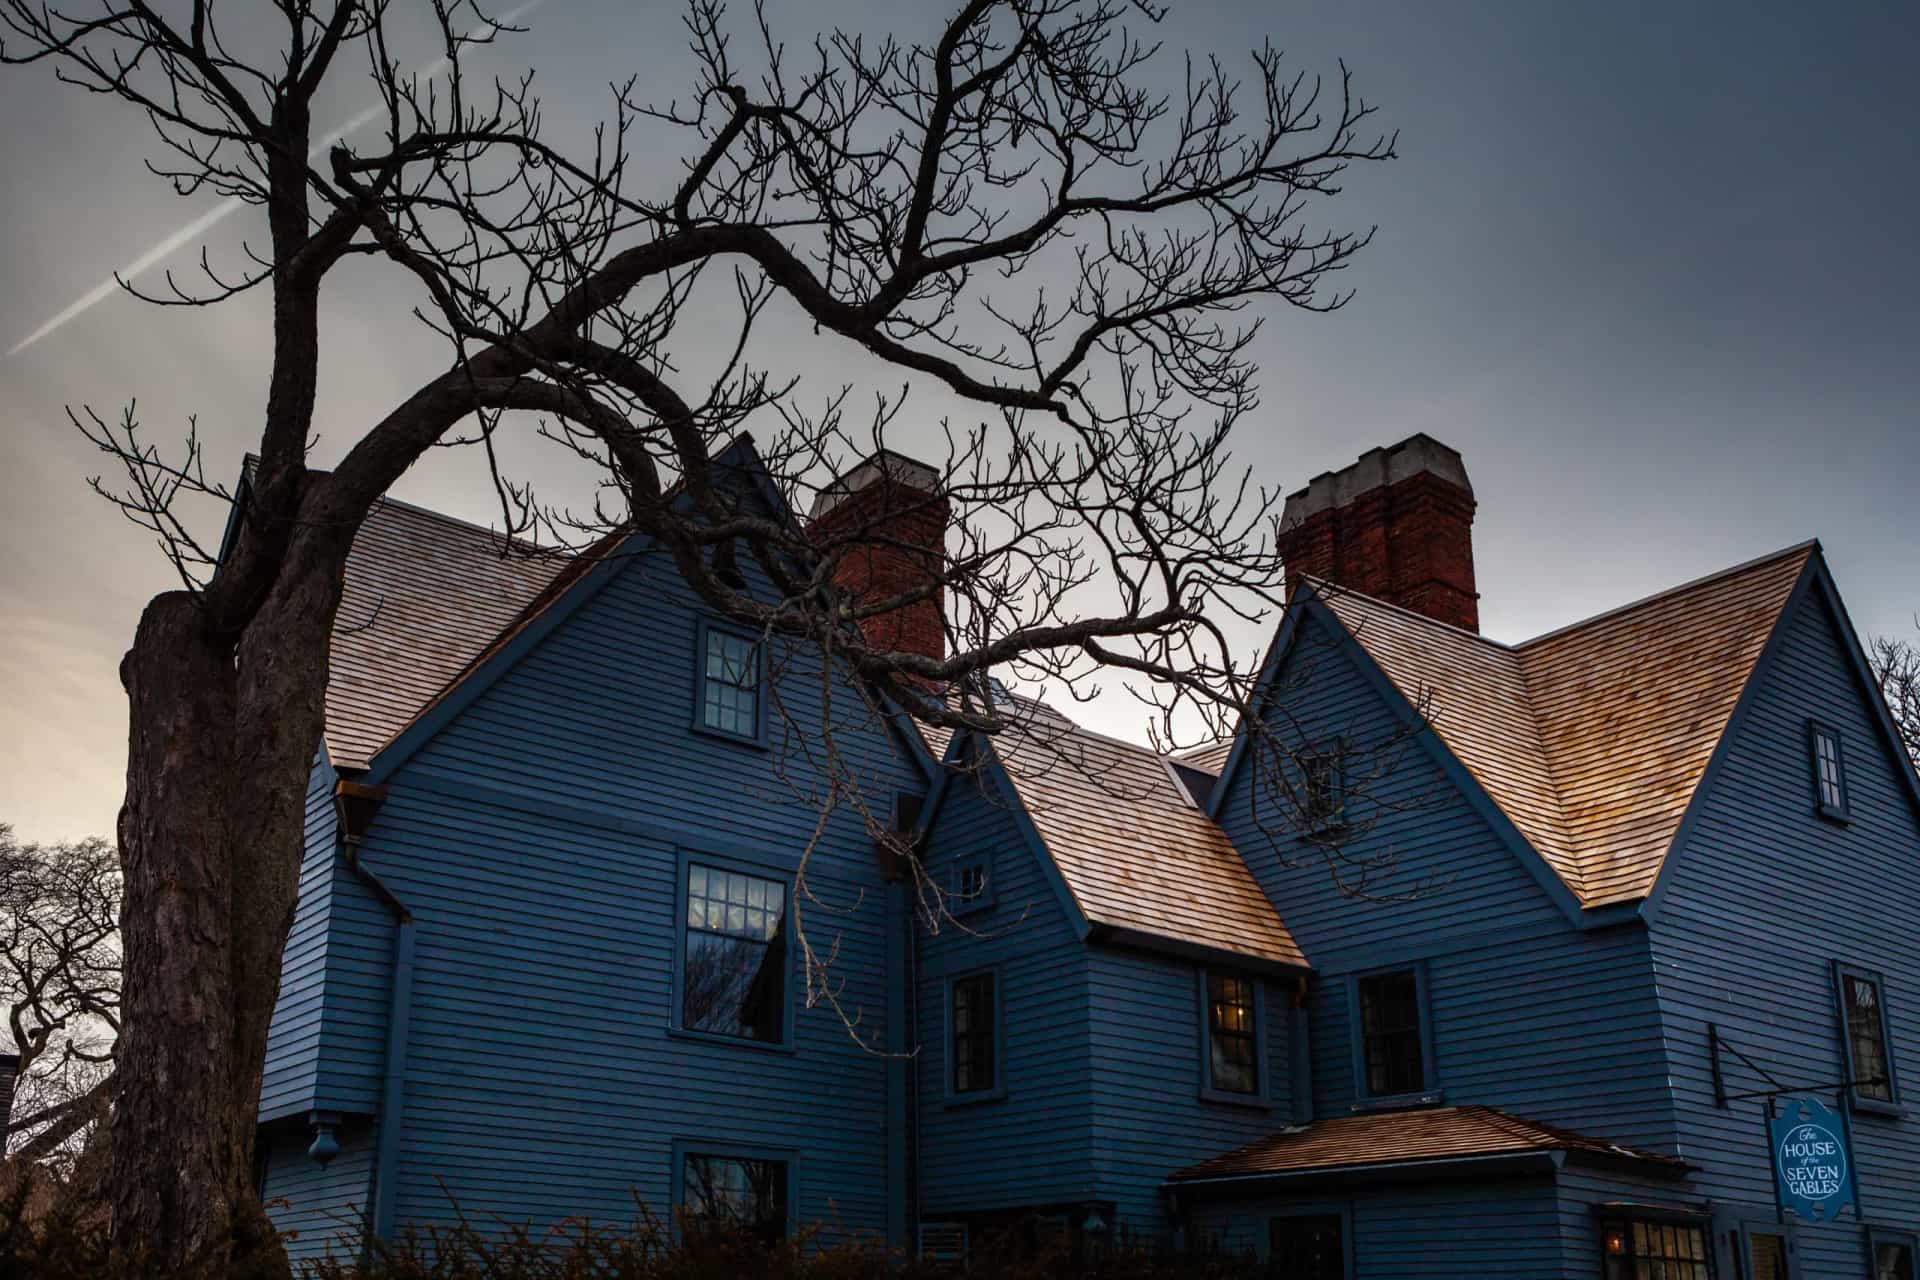 <p>The Turner-Ingersoll Mansion in Salem takes the top spot when it comes to haunted locations in the state. Also known as 'The House of the Seven Gables,' thanks to Nathaniel Hawthorne's novel, the house is said to have been cursed by those executed in the witch trials.</p>